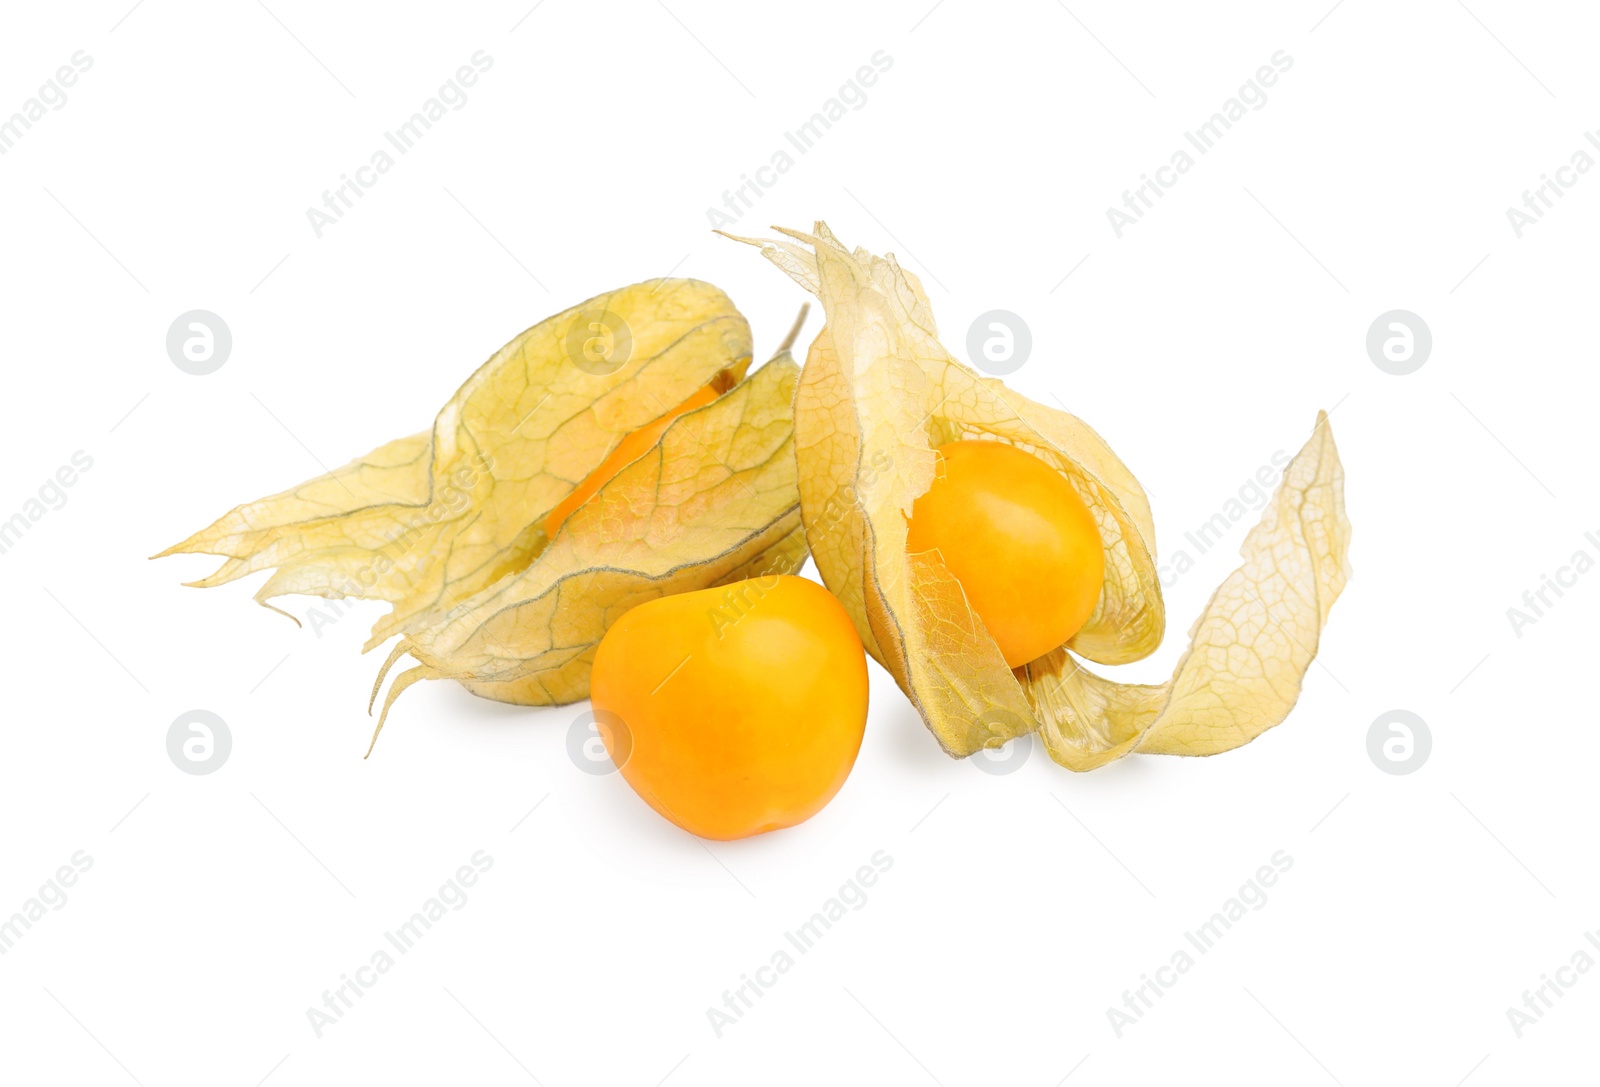 Photo of Ripe physalis fruits with calyxes isolated on white